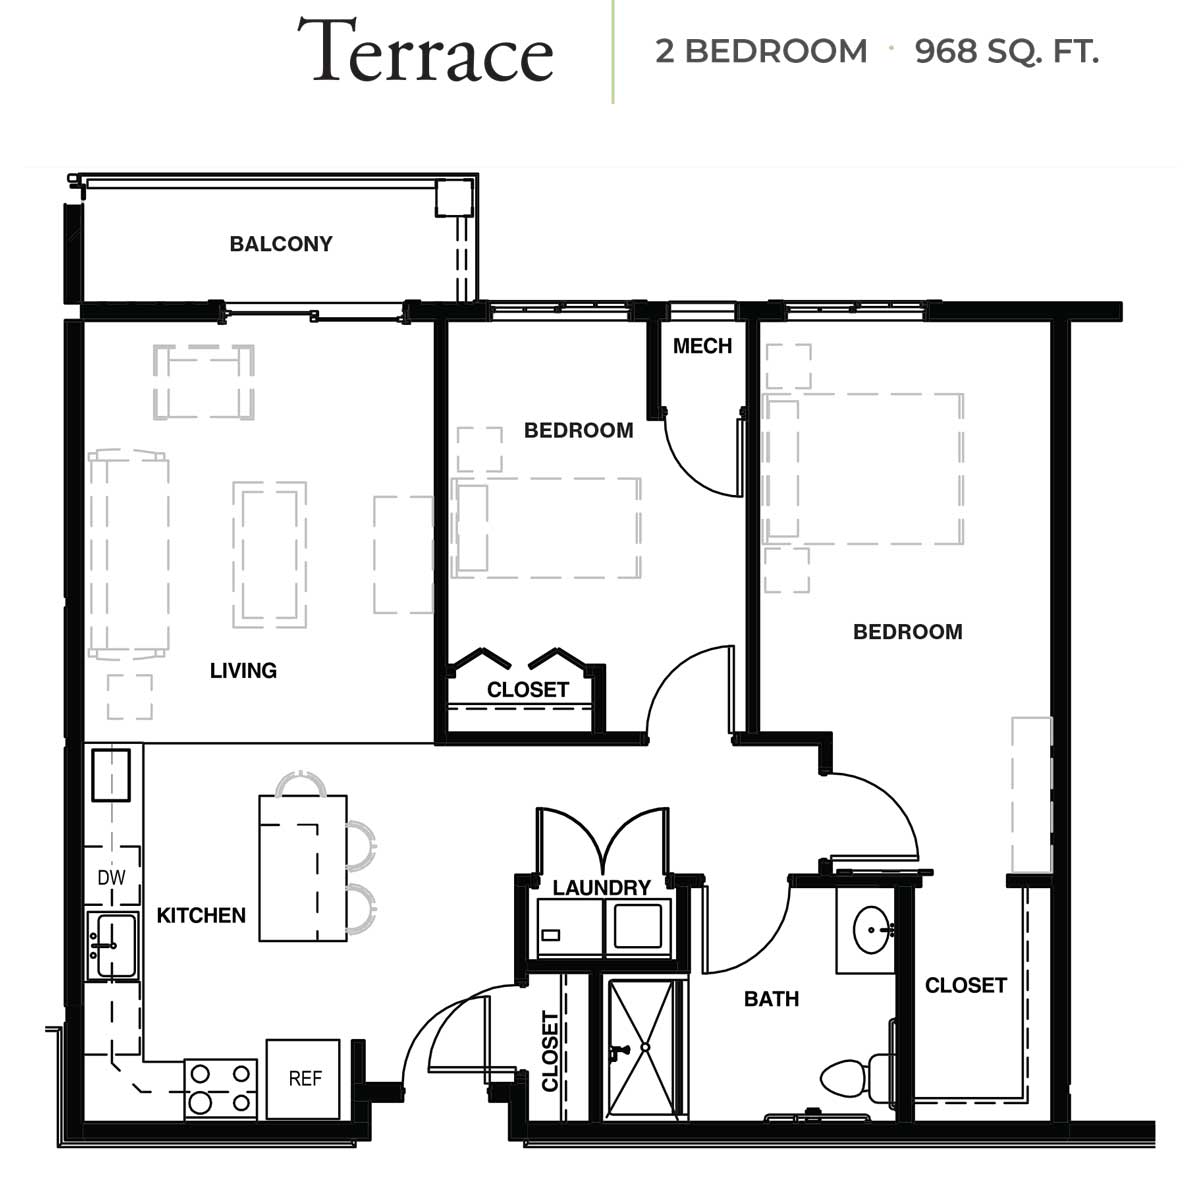 Floor plan of a two-bedroom apartment with a balcony, kitchen, and living area